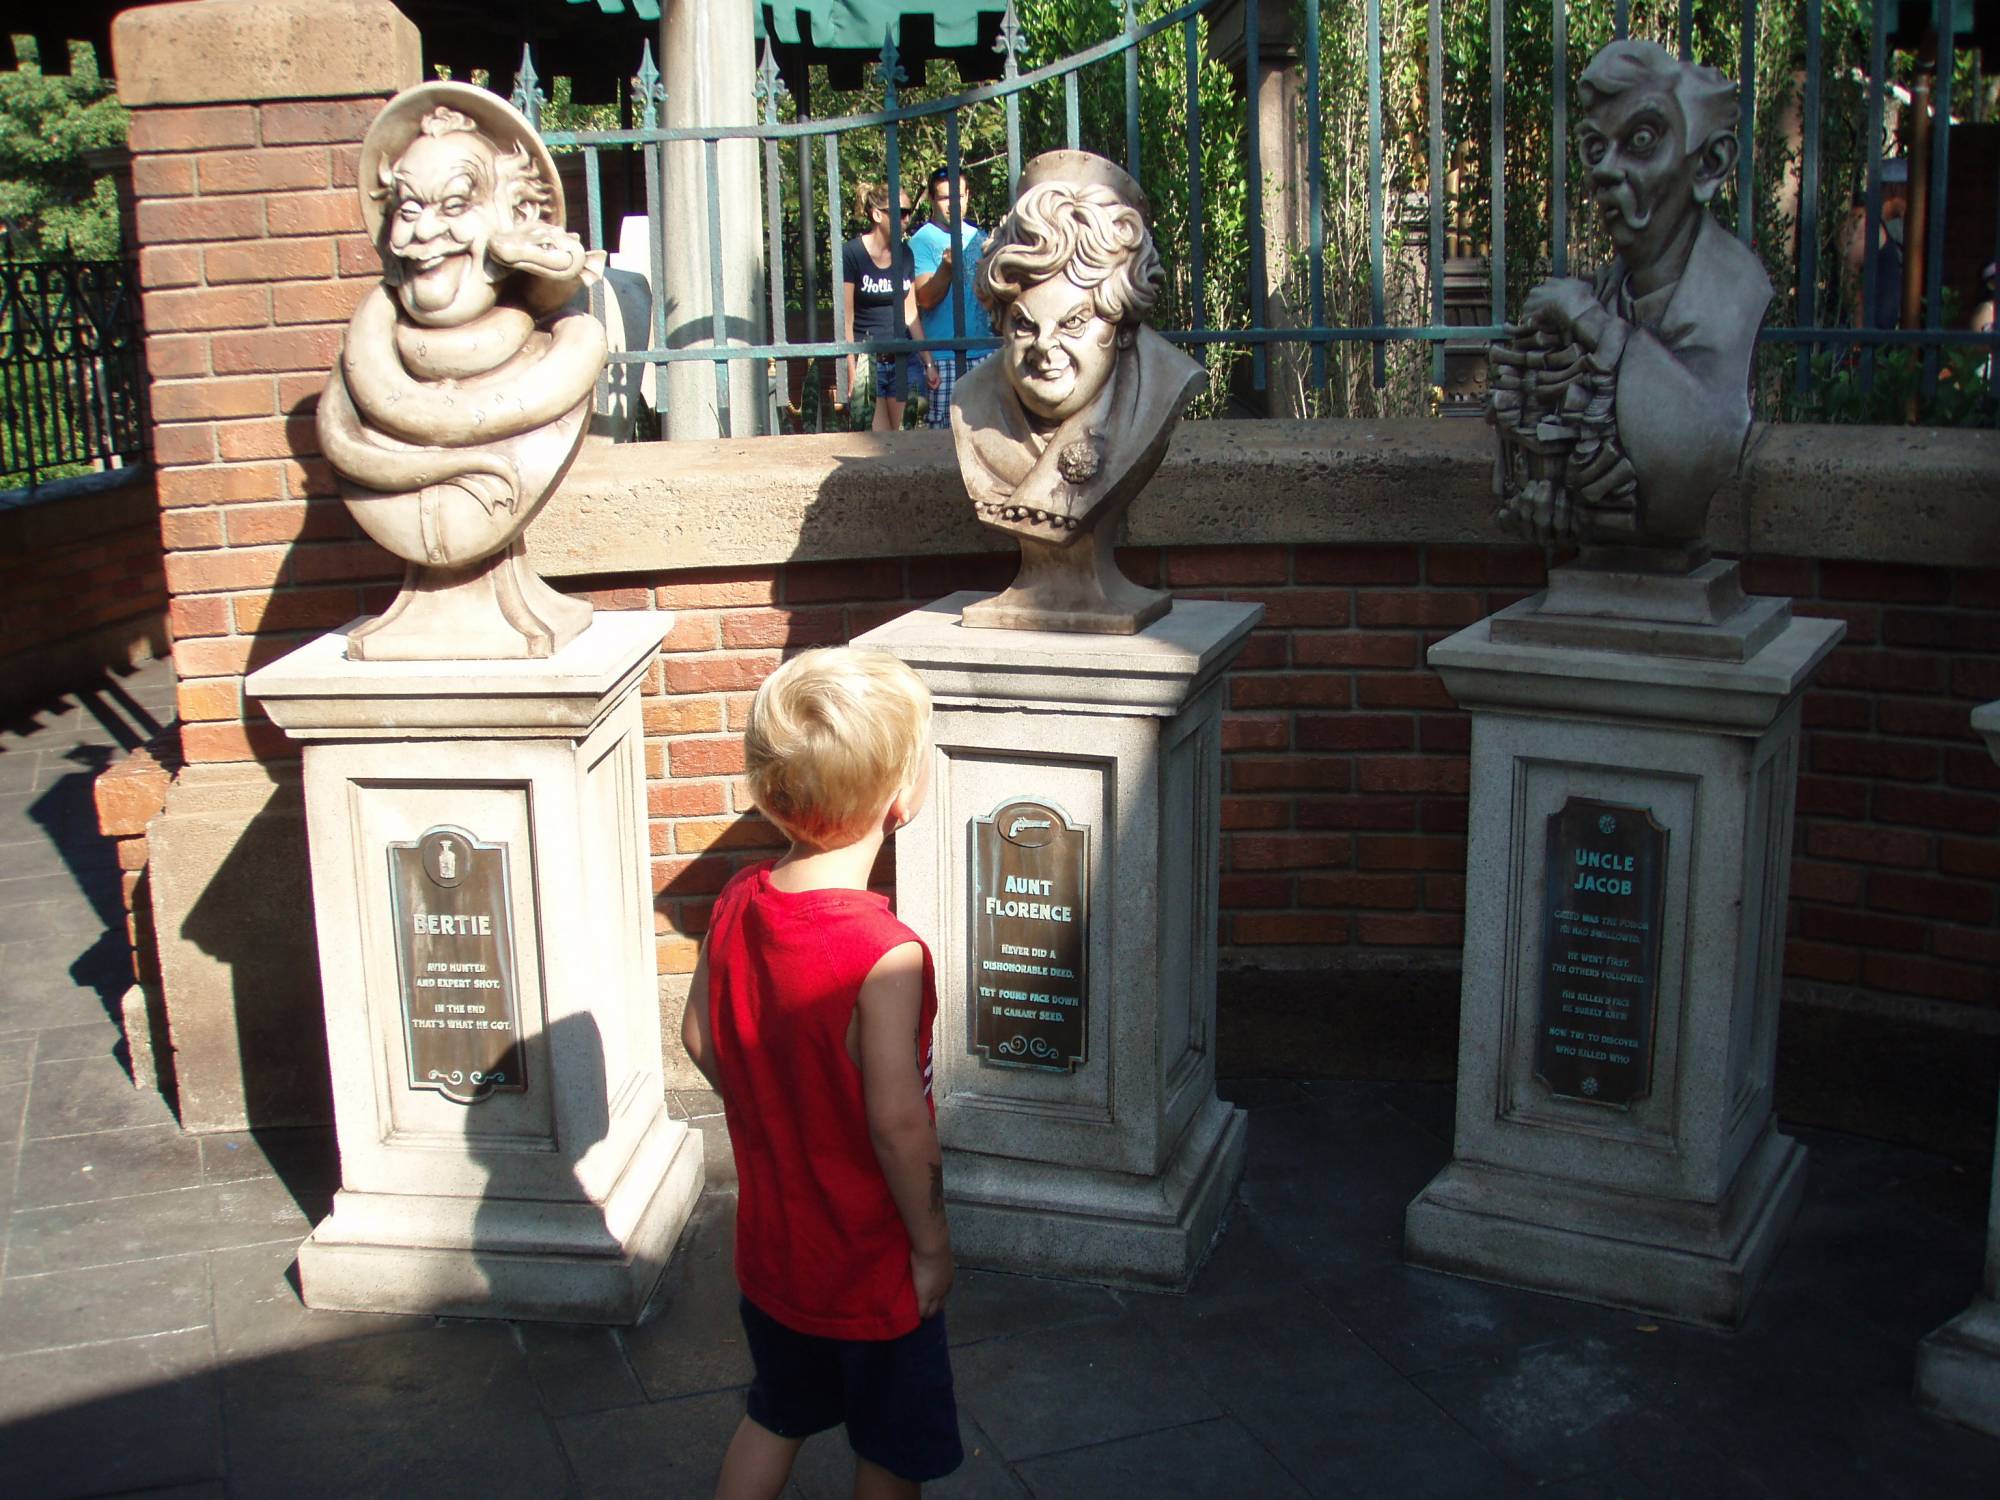 Evan checks out the new statues